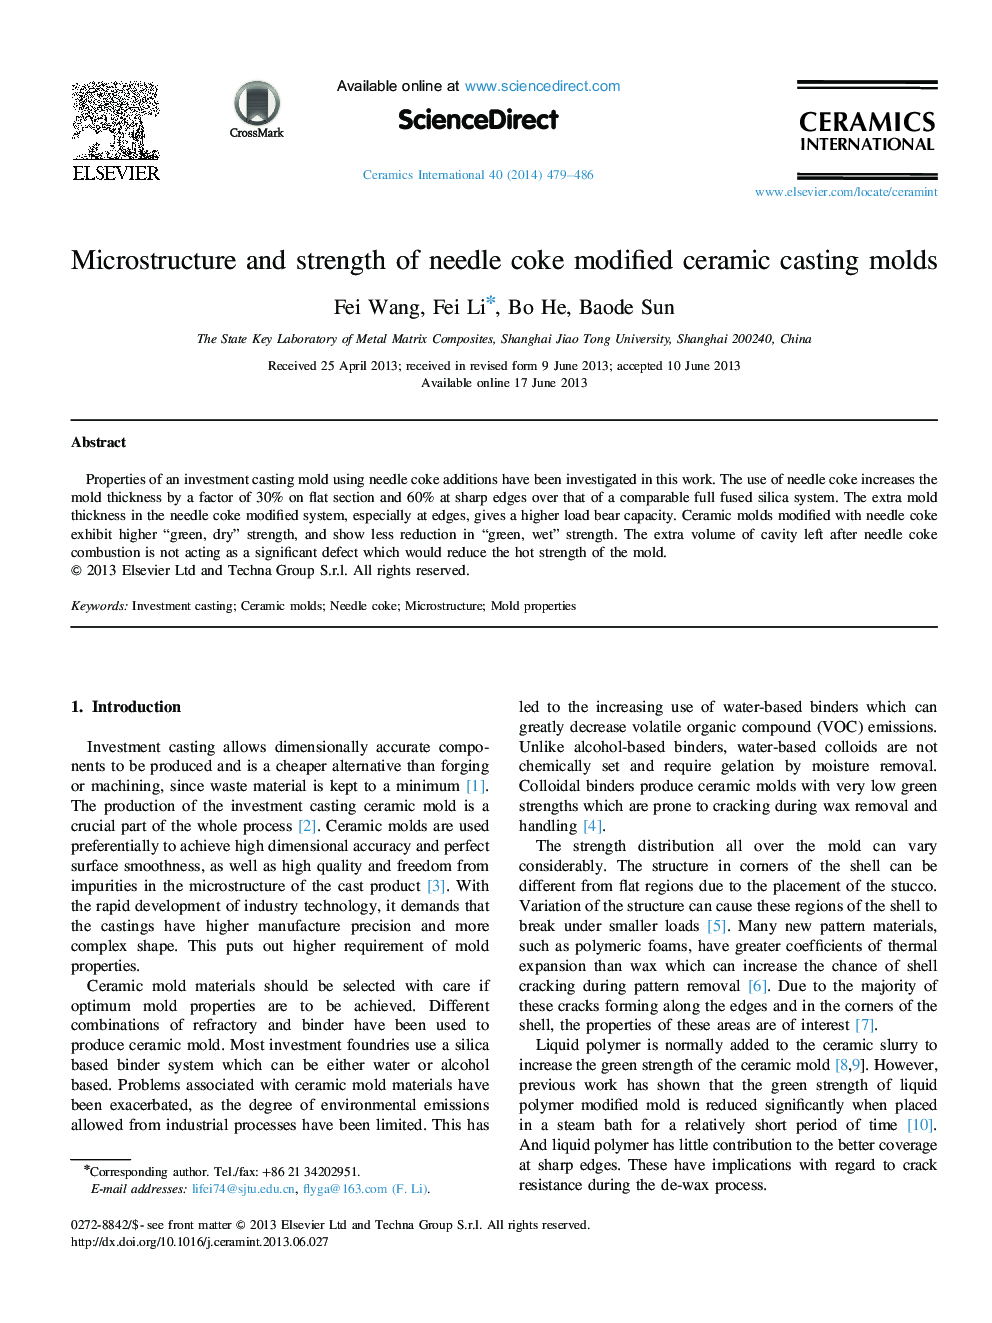 Microstructure and strength of needle coke modified ceramic casting molds